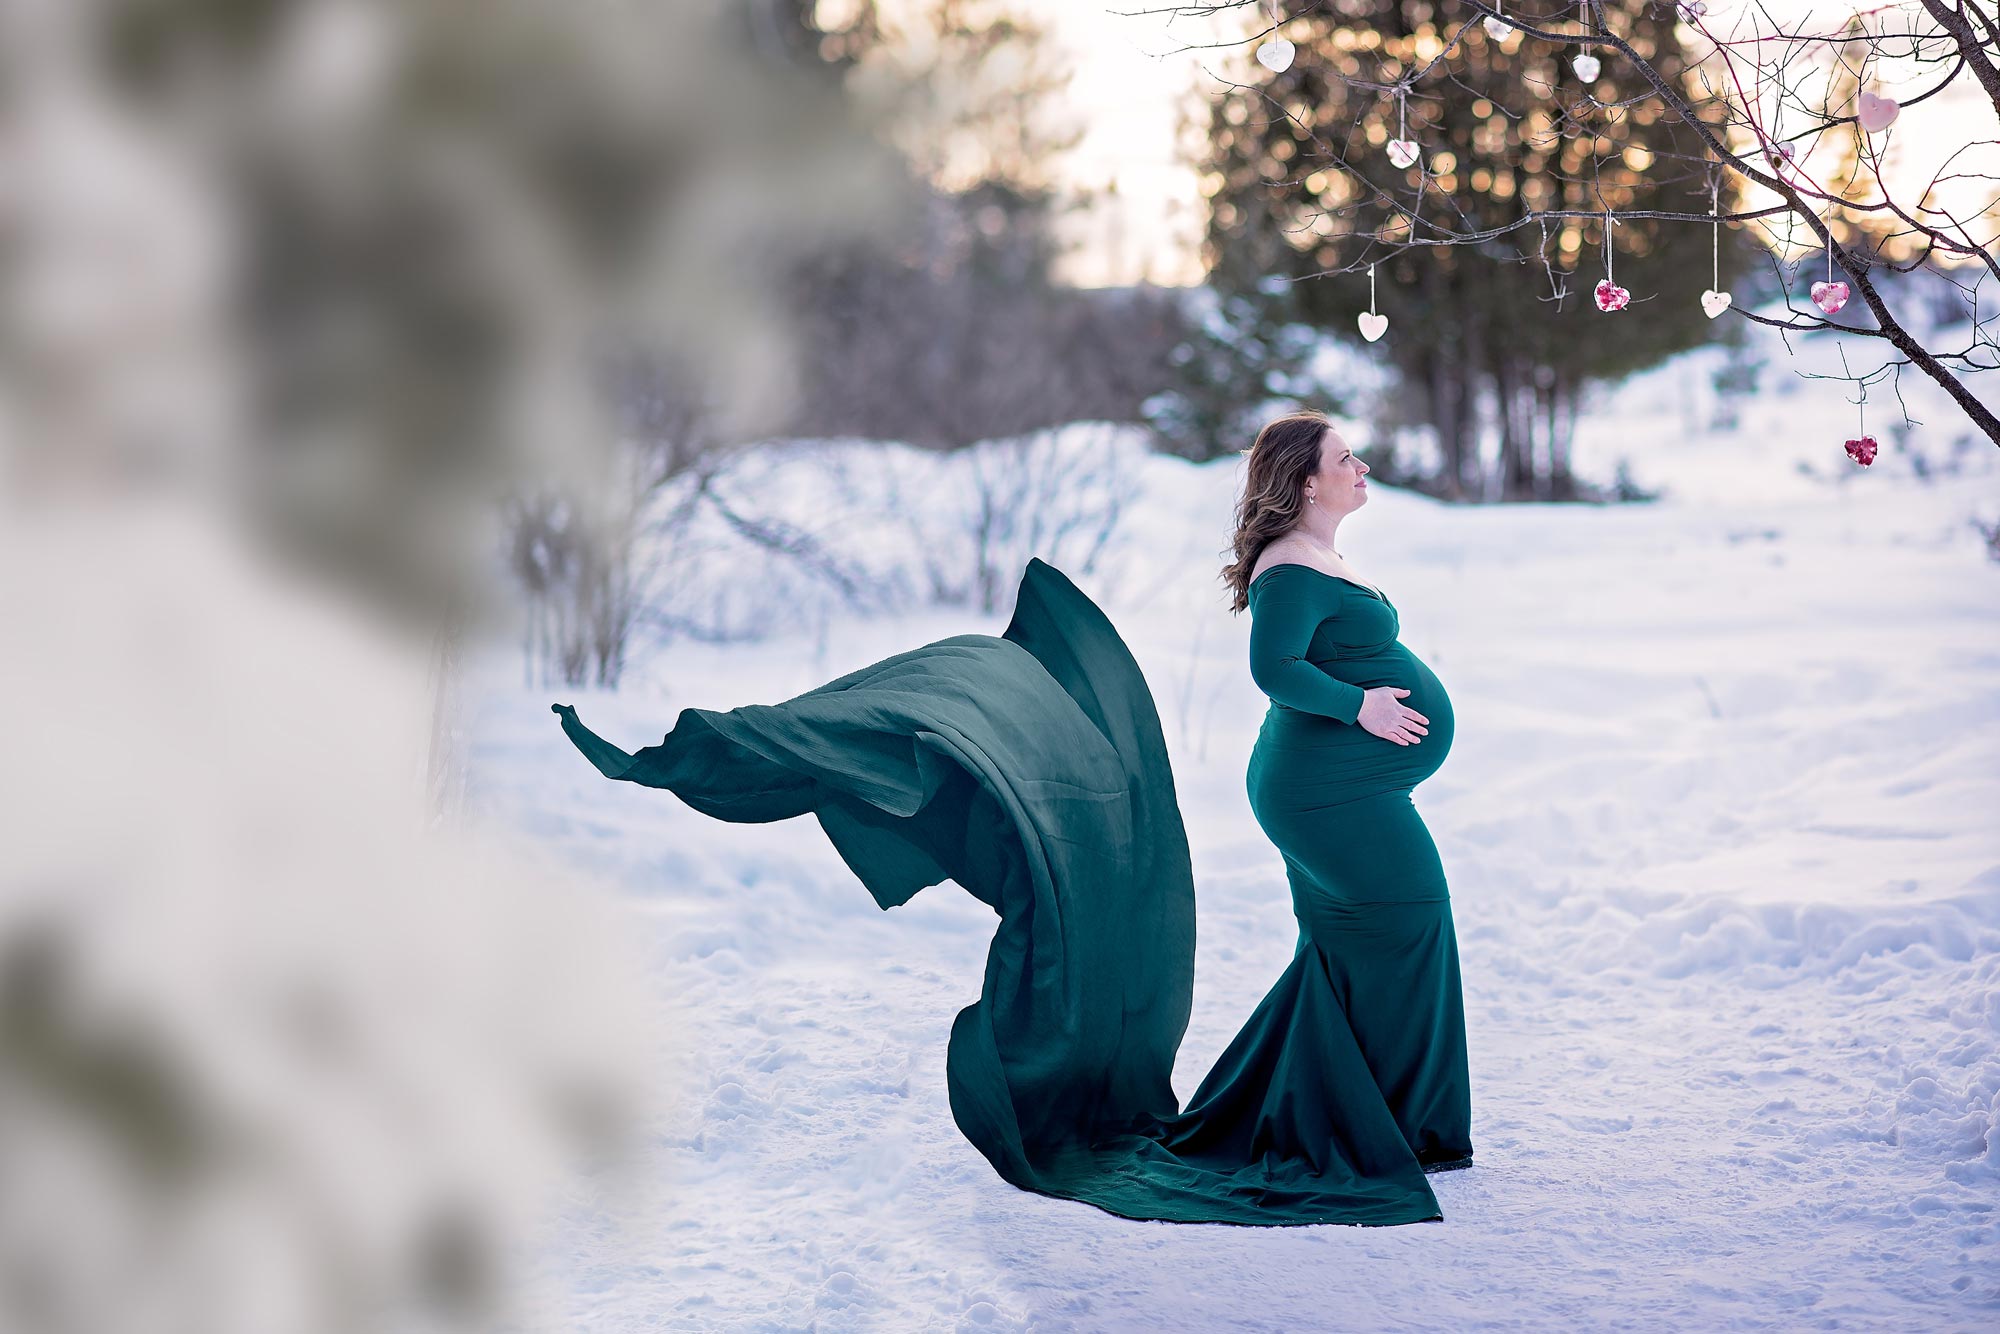 green maternity gown